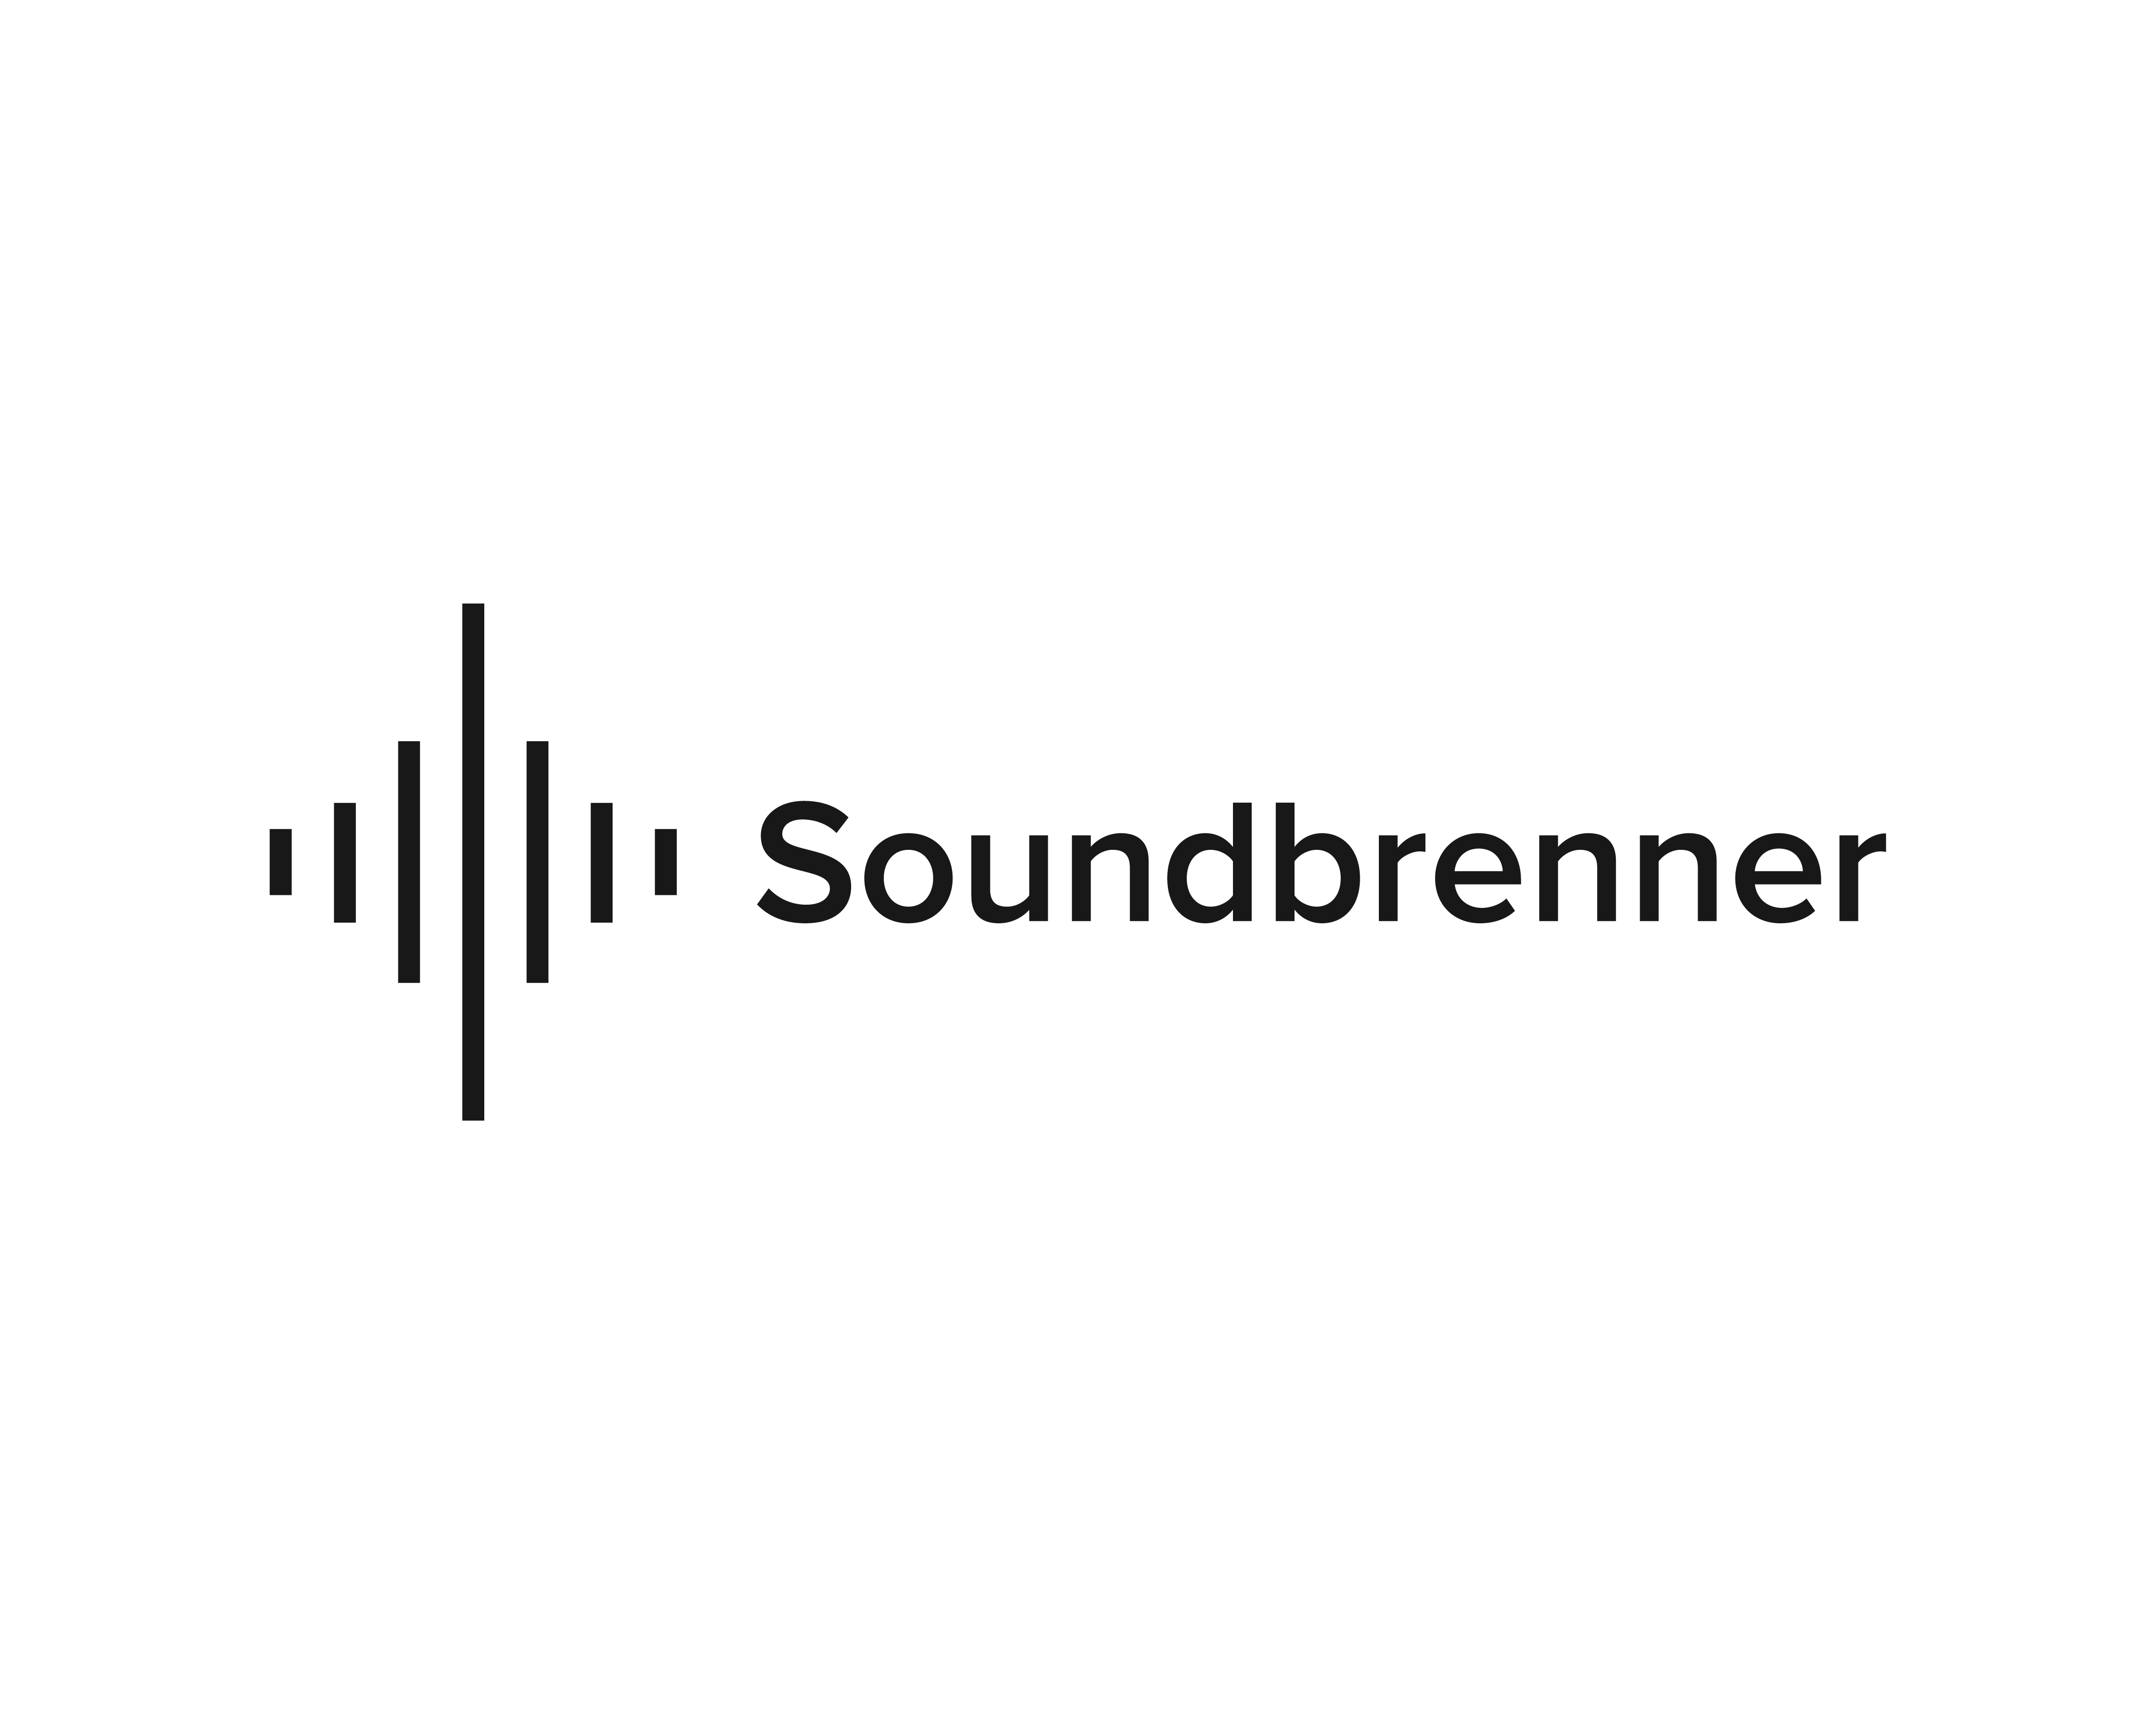 Soundbrenner in black lettering next to a waveform icon